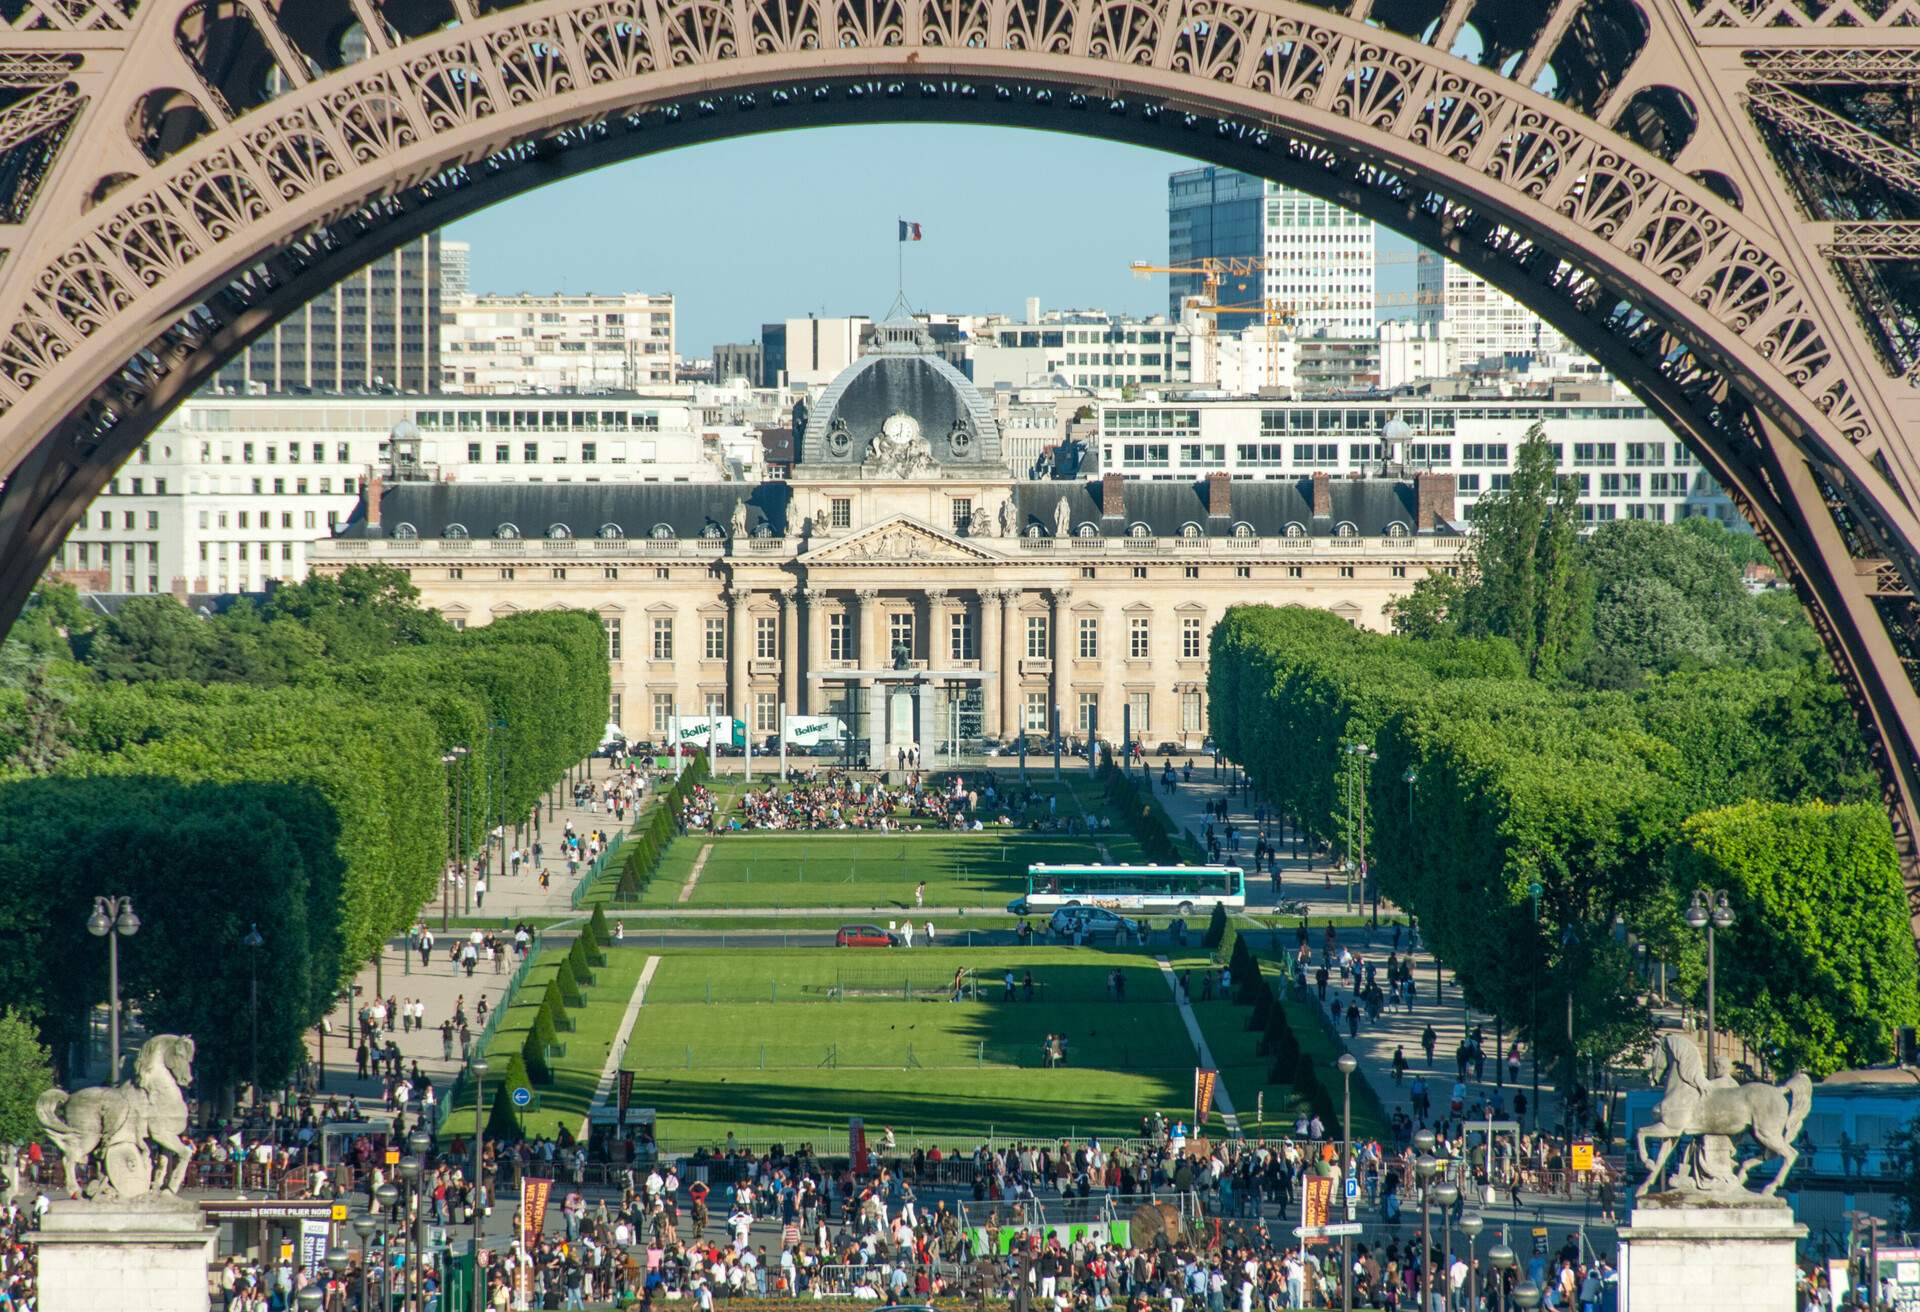 Crowds beneath the Eiffel Tower arches with a view of Champs de Mars